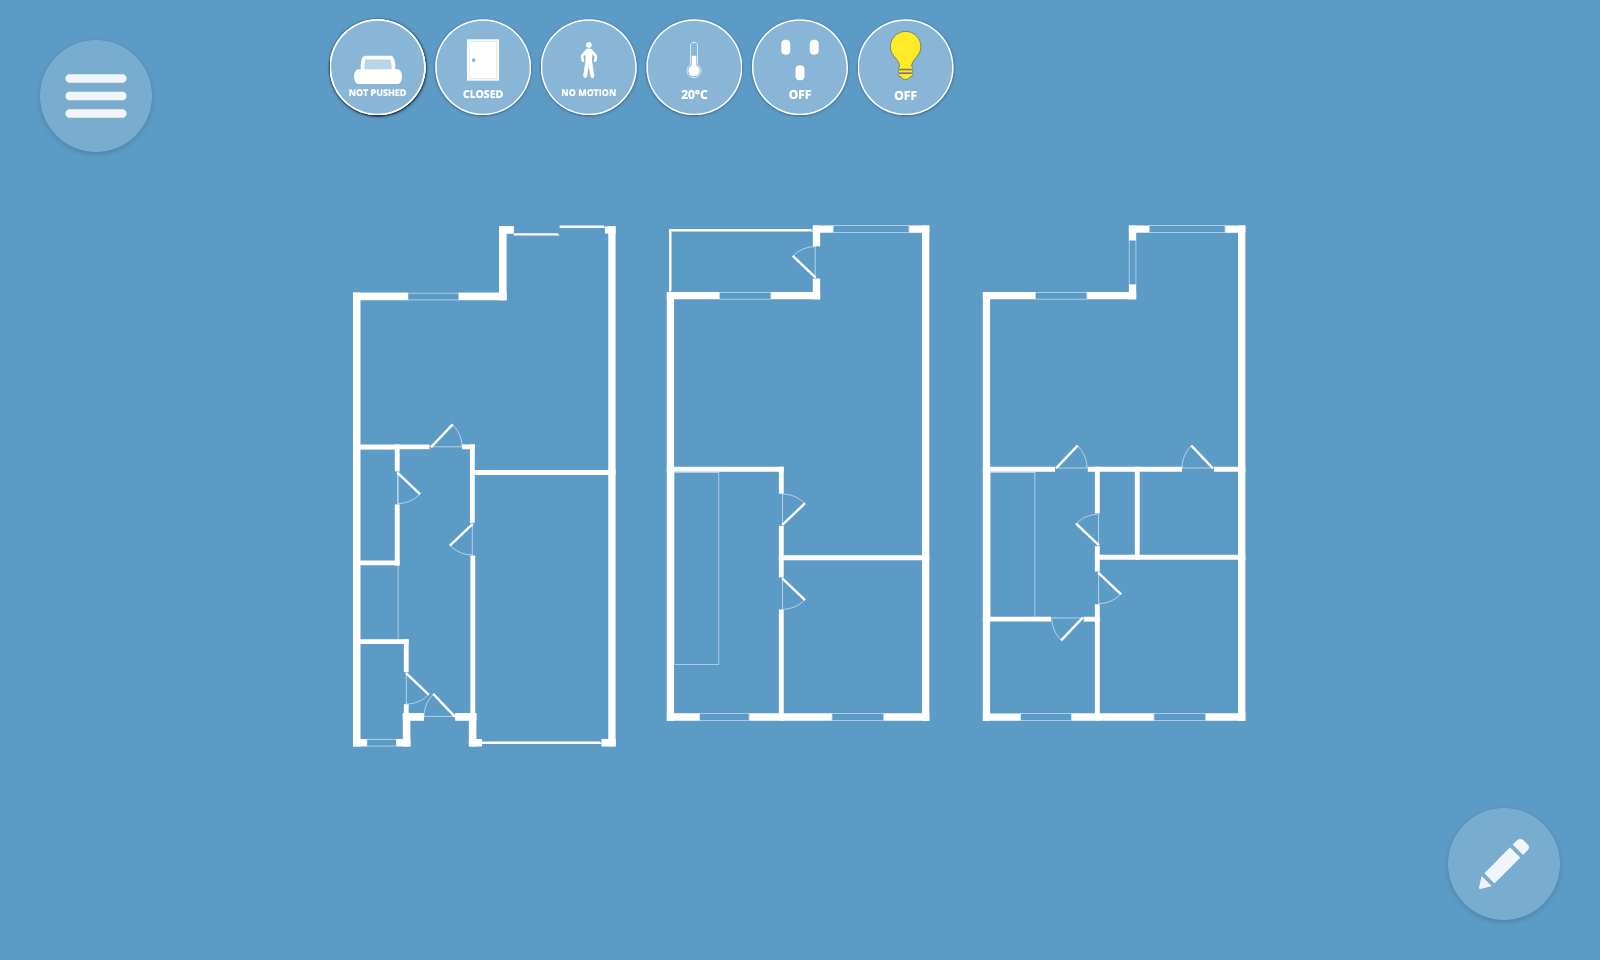 Screenshot of the floorplan view with a floorplan uploaded by things still unarranged